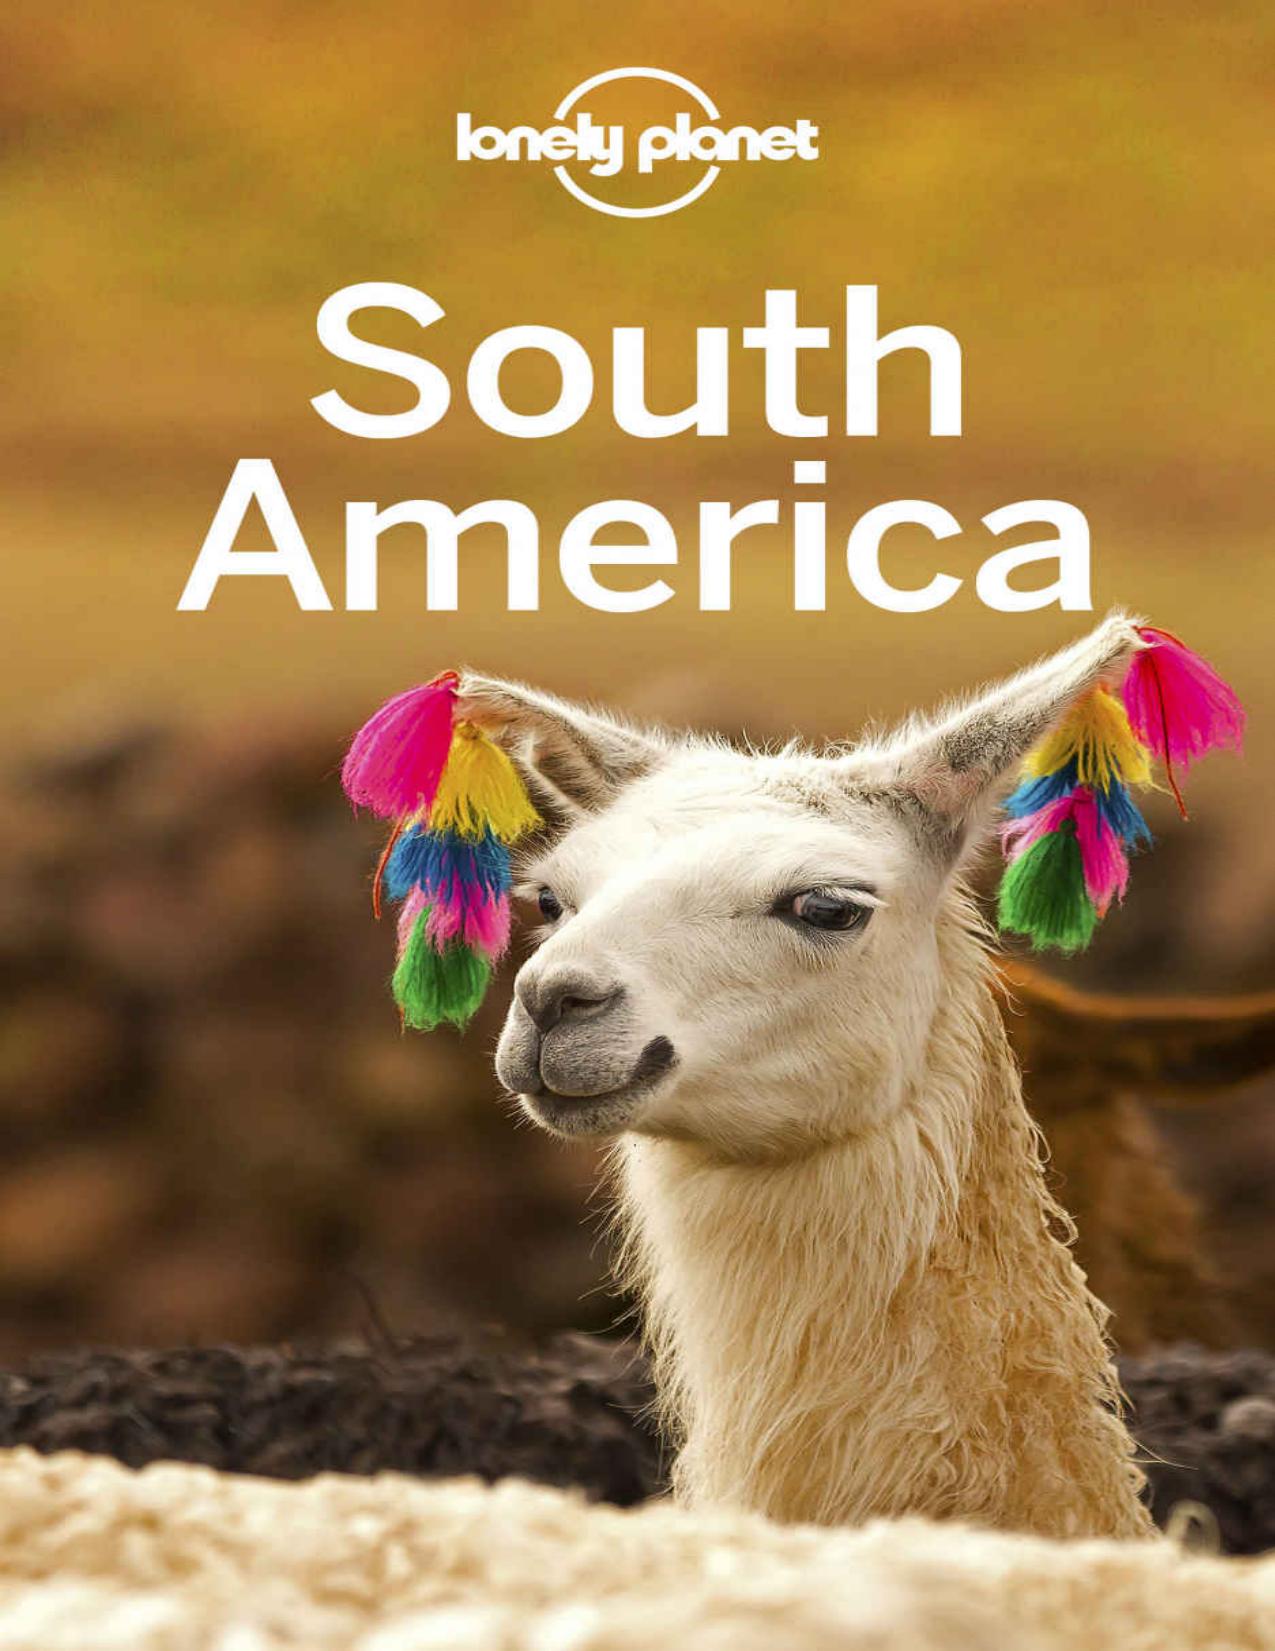 Lonely Planet South America (Travel Guide) by unknow